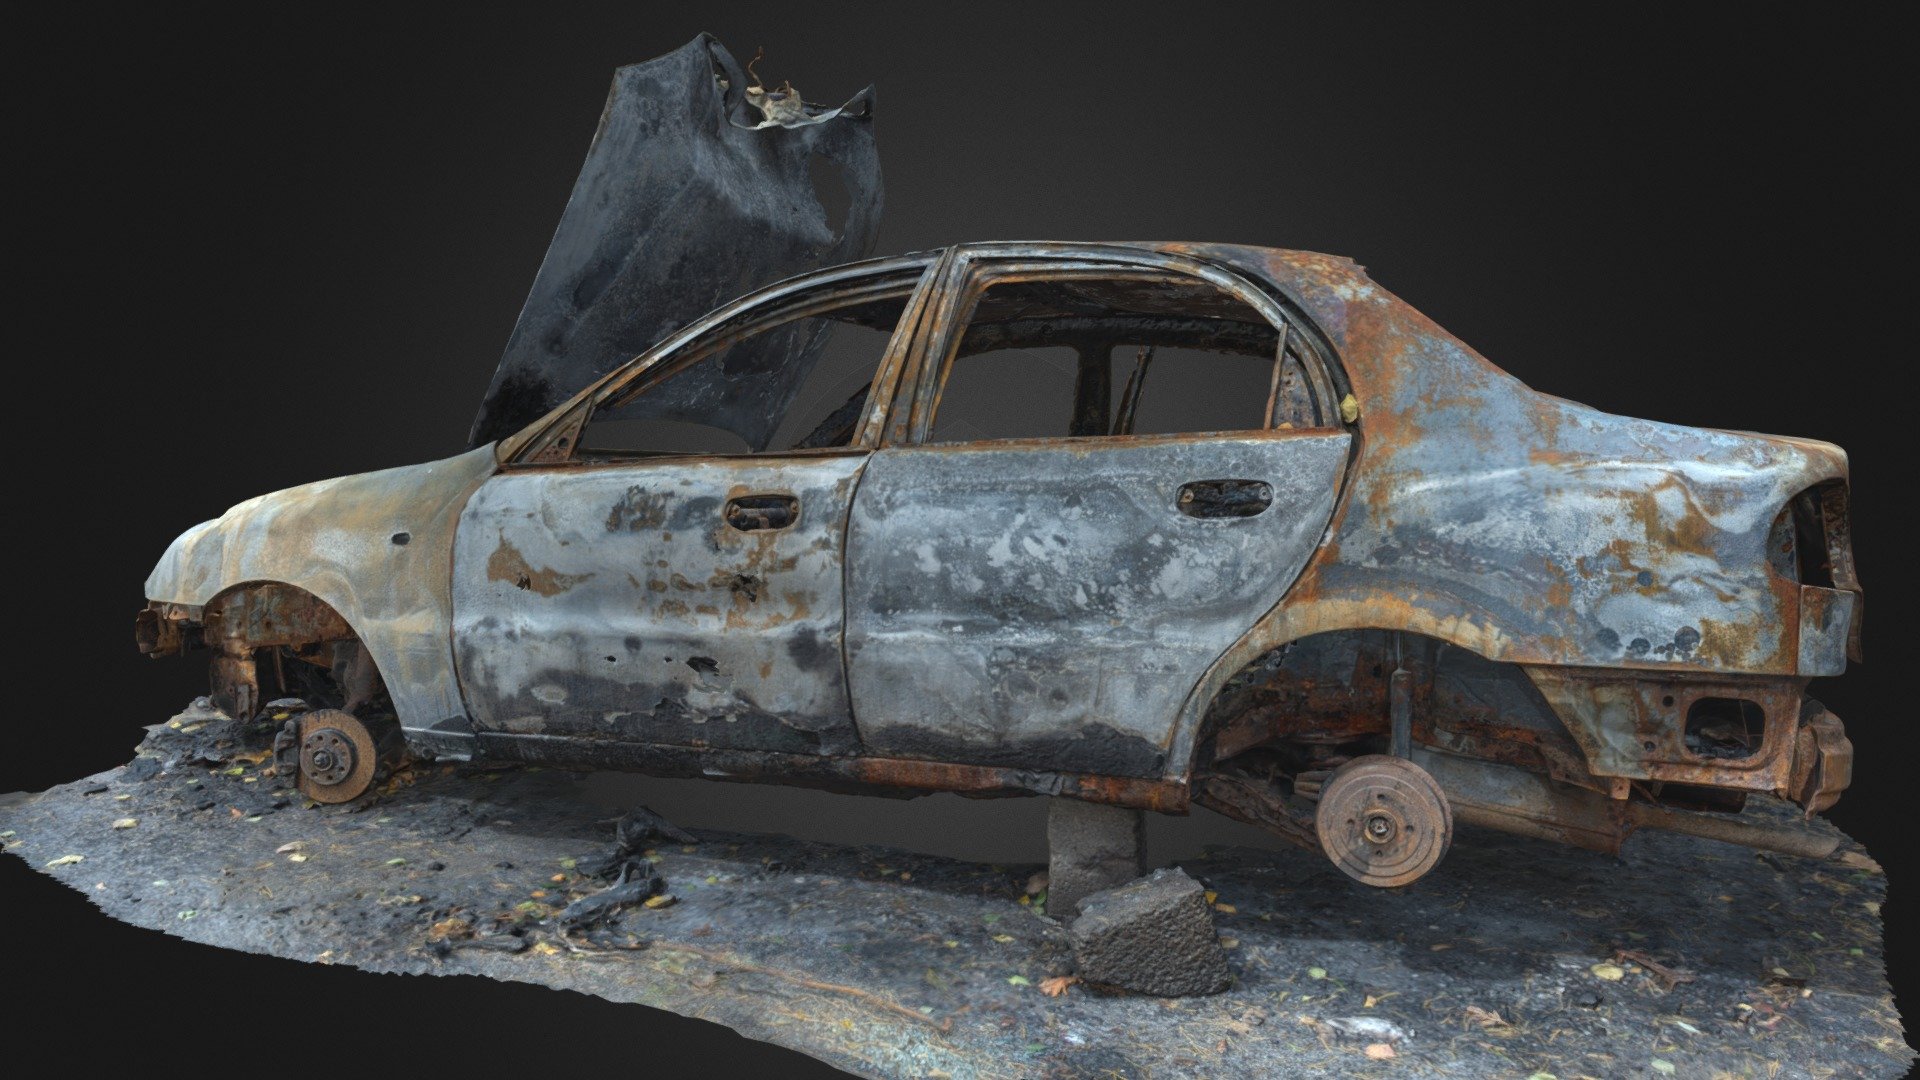 3D scan of an old burned car wreck.

No windows, very rusty, burned metal. Open hood, burned engine.

With normal map 3d model